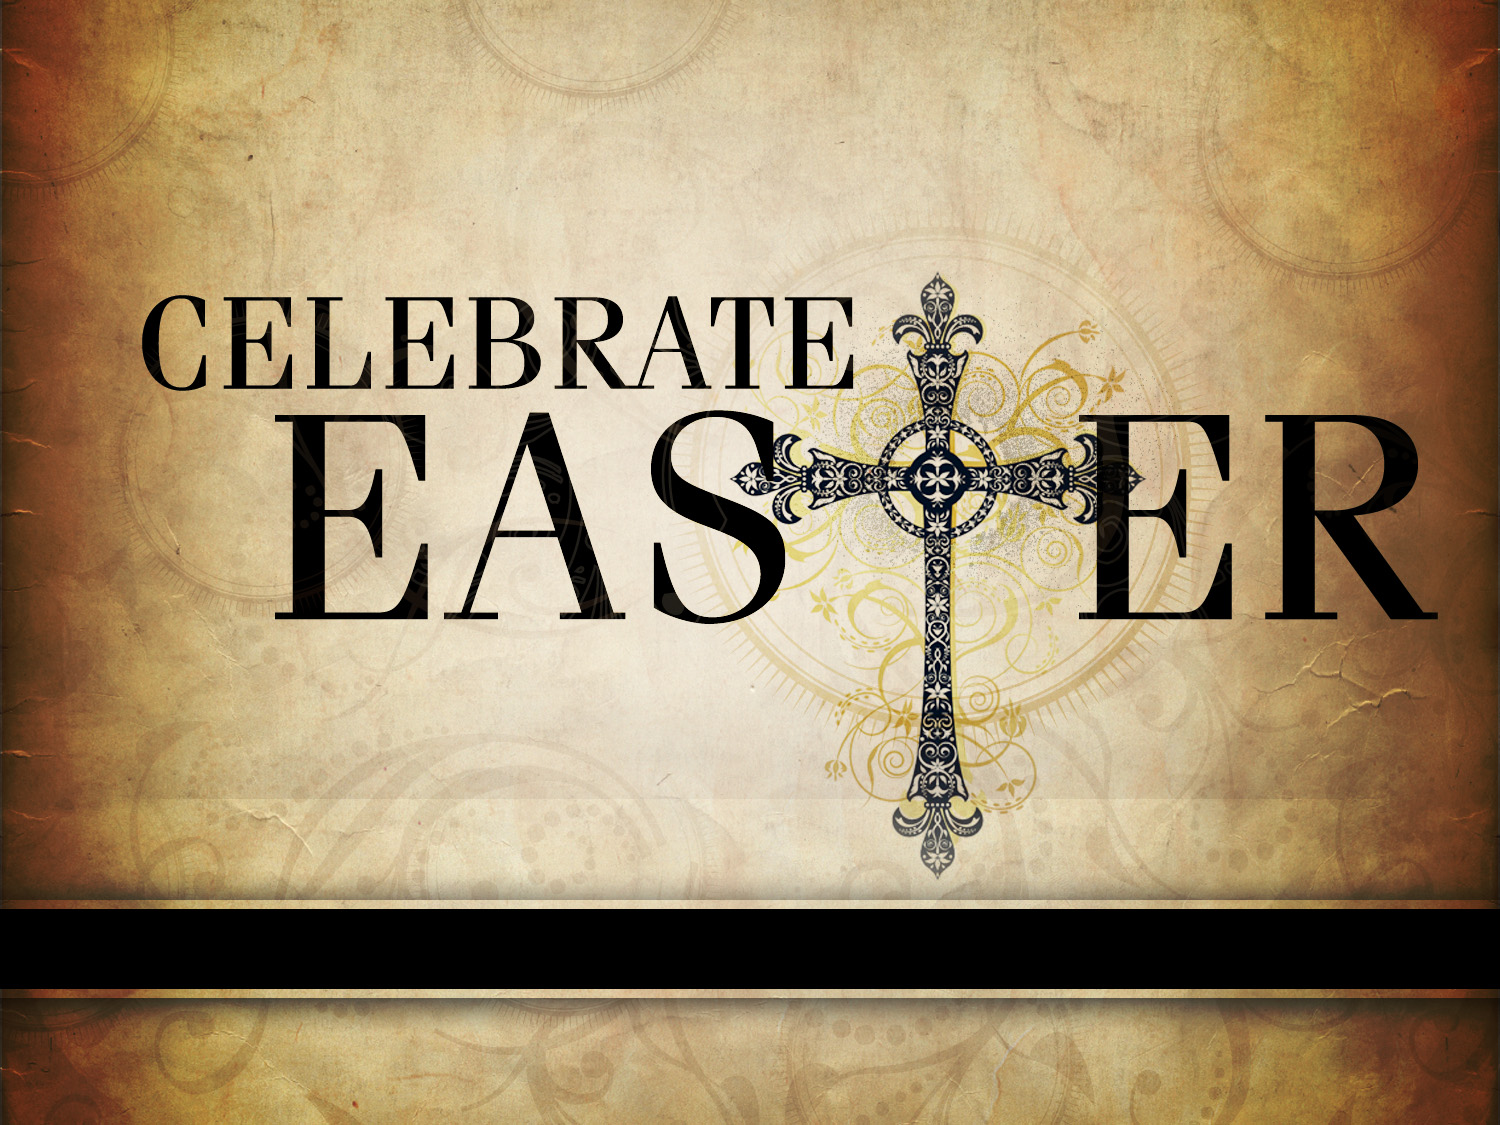 Easter Hd Images Free Download Religious - 1500x1125 Wallpaper 